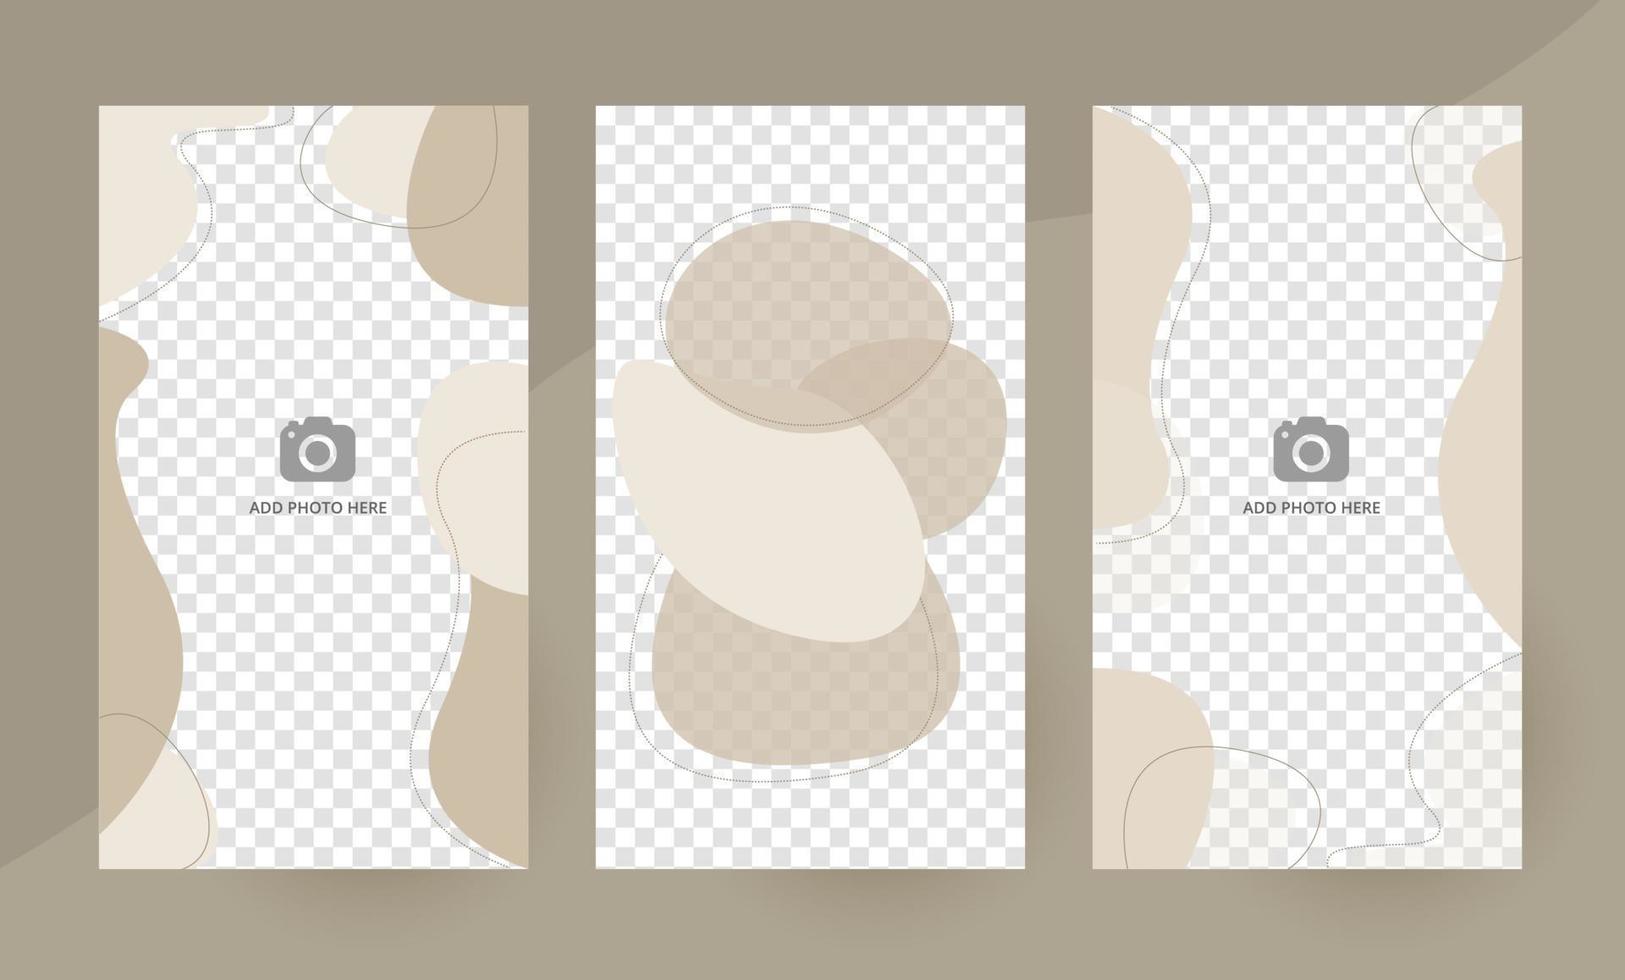 Abstract background for social media story banner. Set of vertical minimal layouts with organic shapes in earth tones. Editable template with a placeholder for picture. Vector illustration